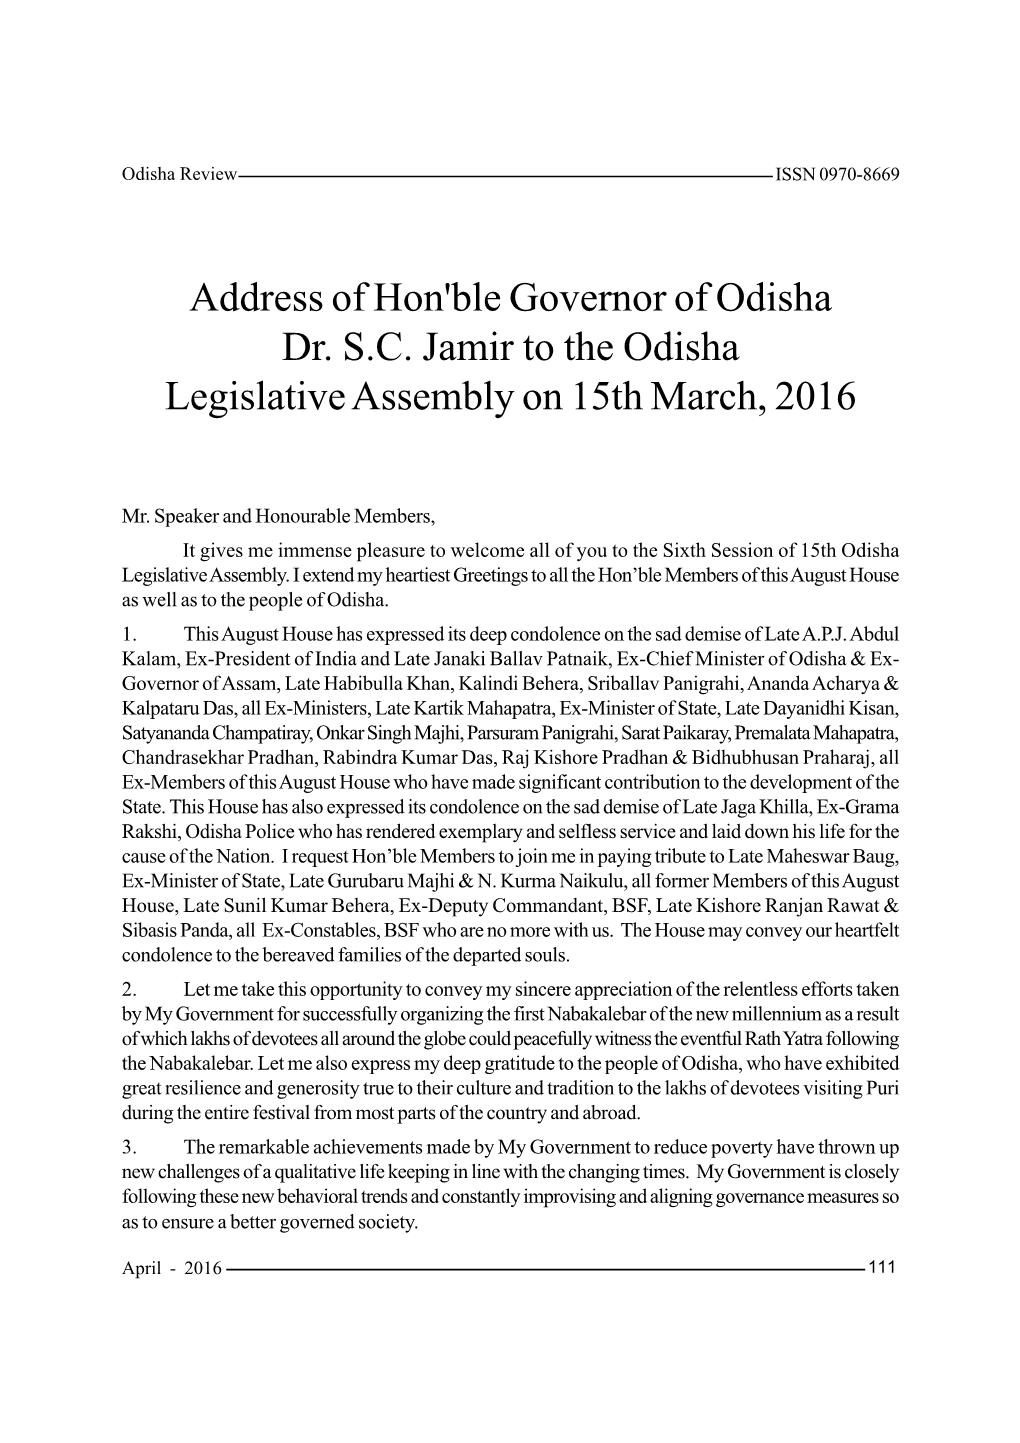 Address of Hon'ble Governor of Odisha Dr. S.C. Jamir to the Odisha Legislative Assembly on 15Th March, 2016